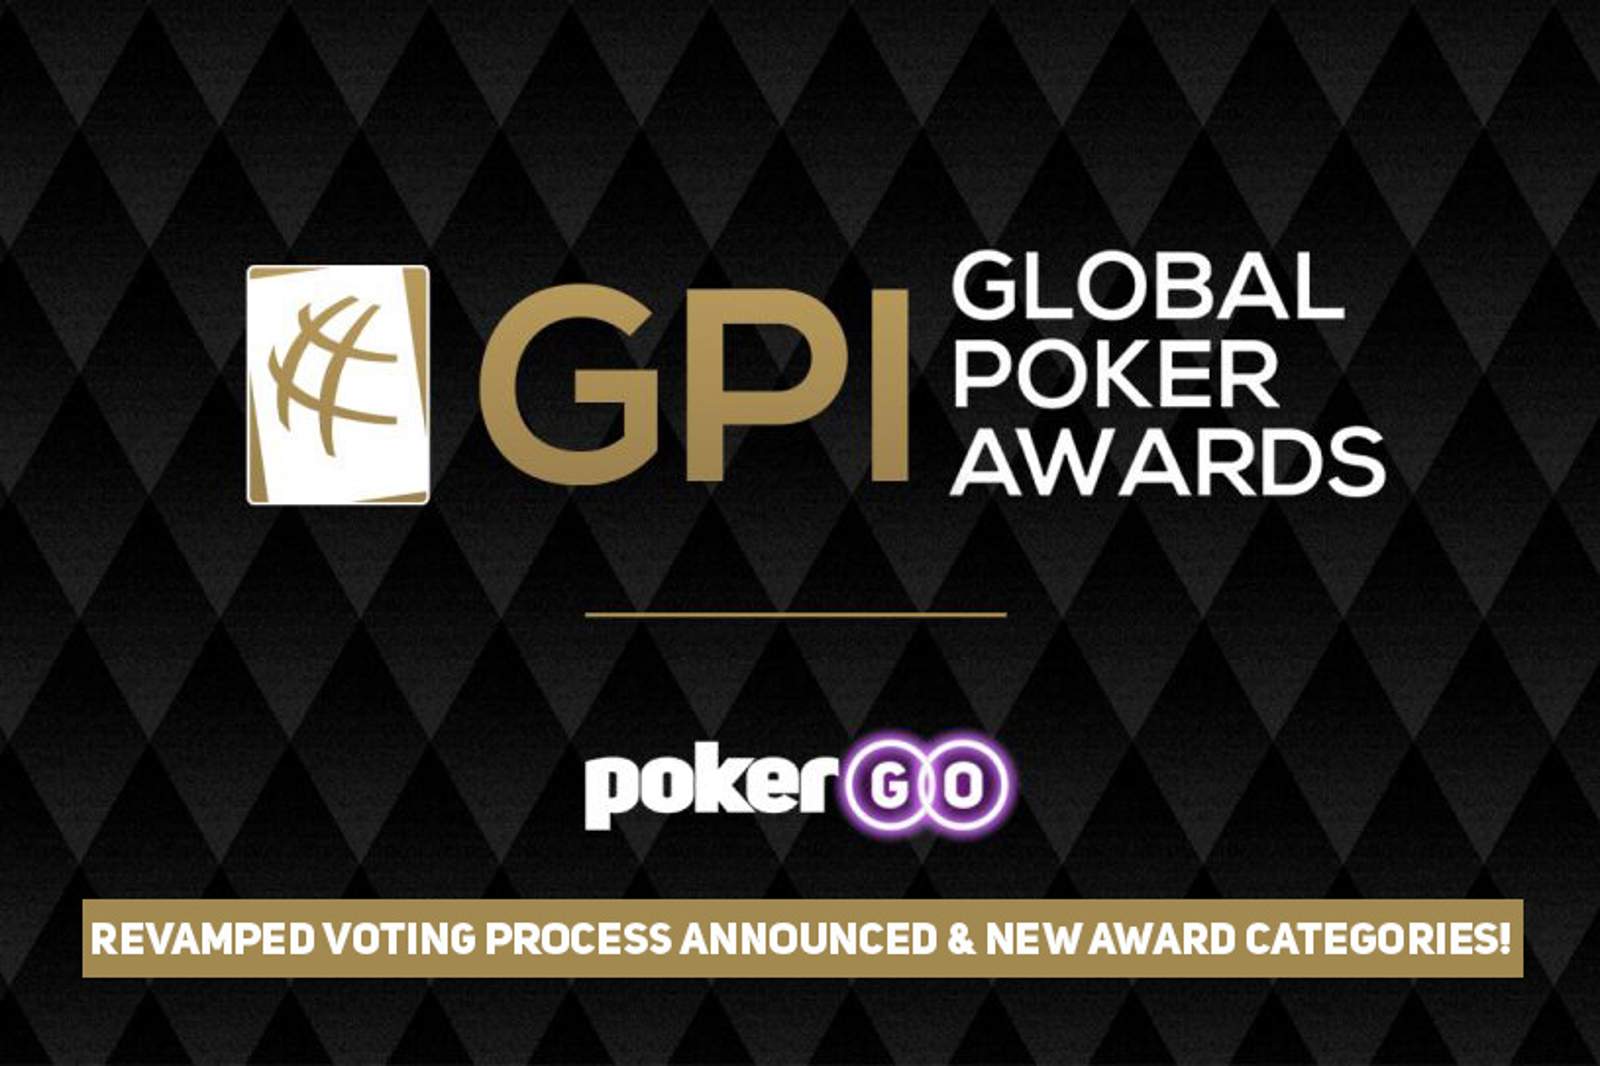 Global Poker Awards - Revamped Voting Process & New Categories Announced